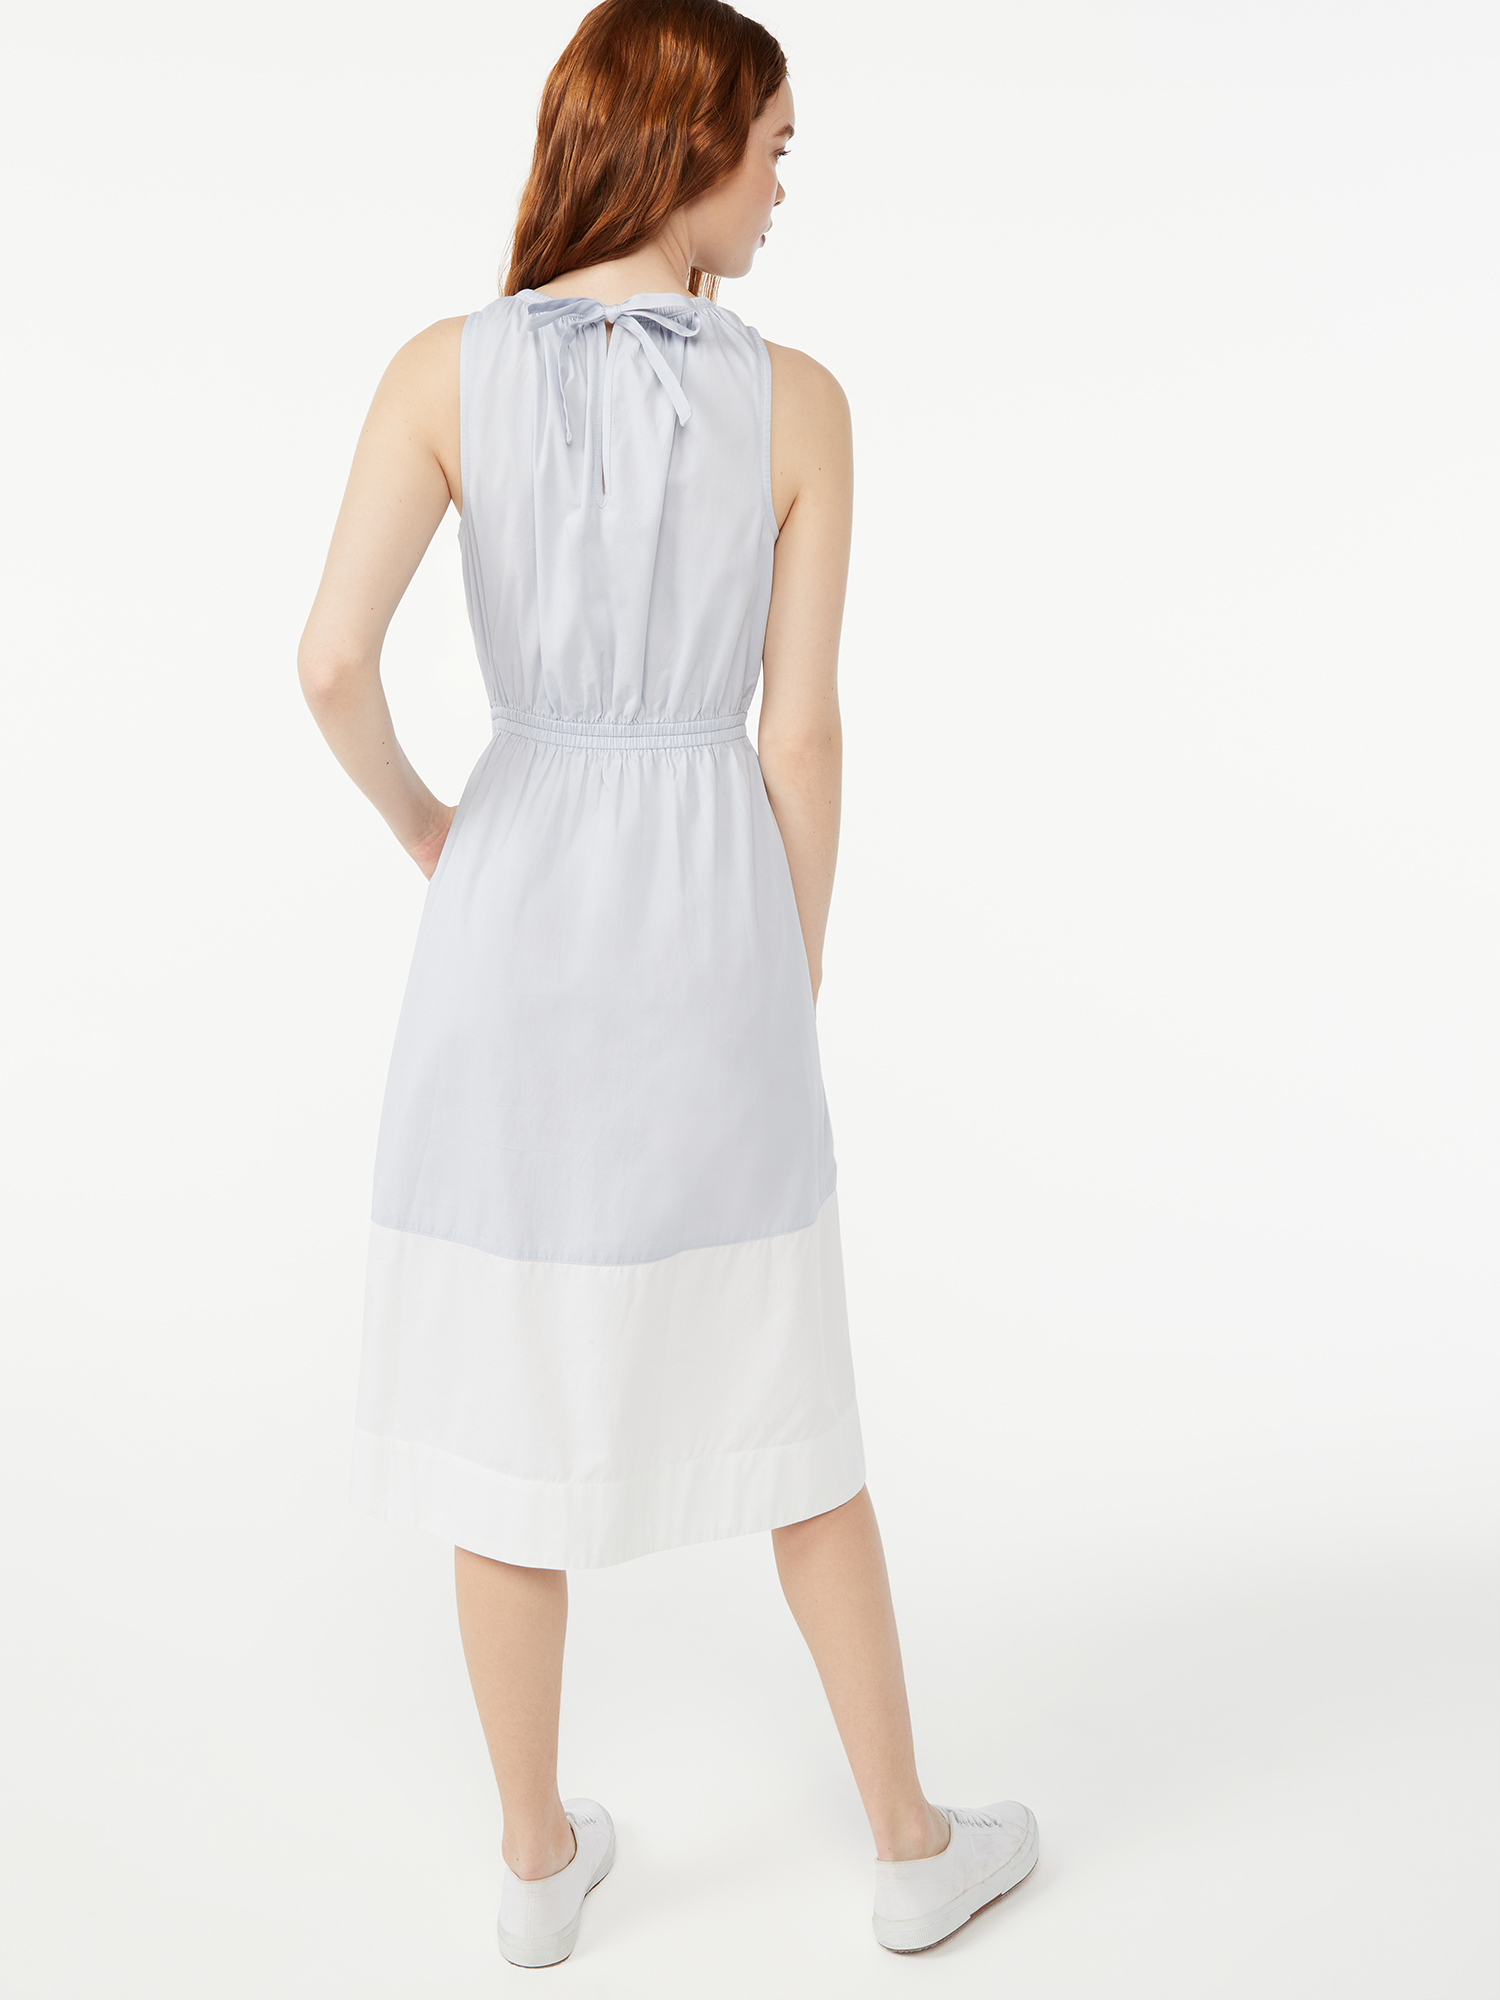 Free Assembly Women's Sleeveless Fit and Flare Dress - image 4 of 4